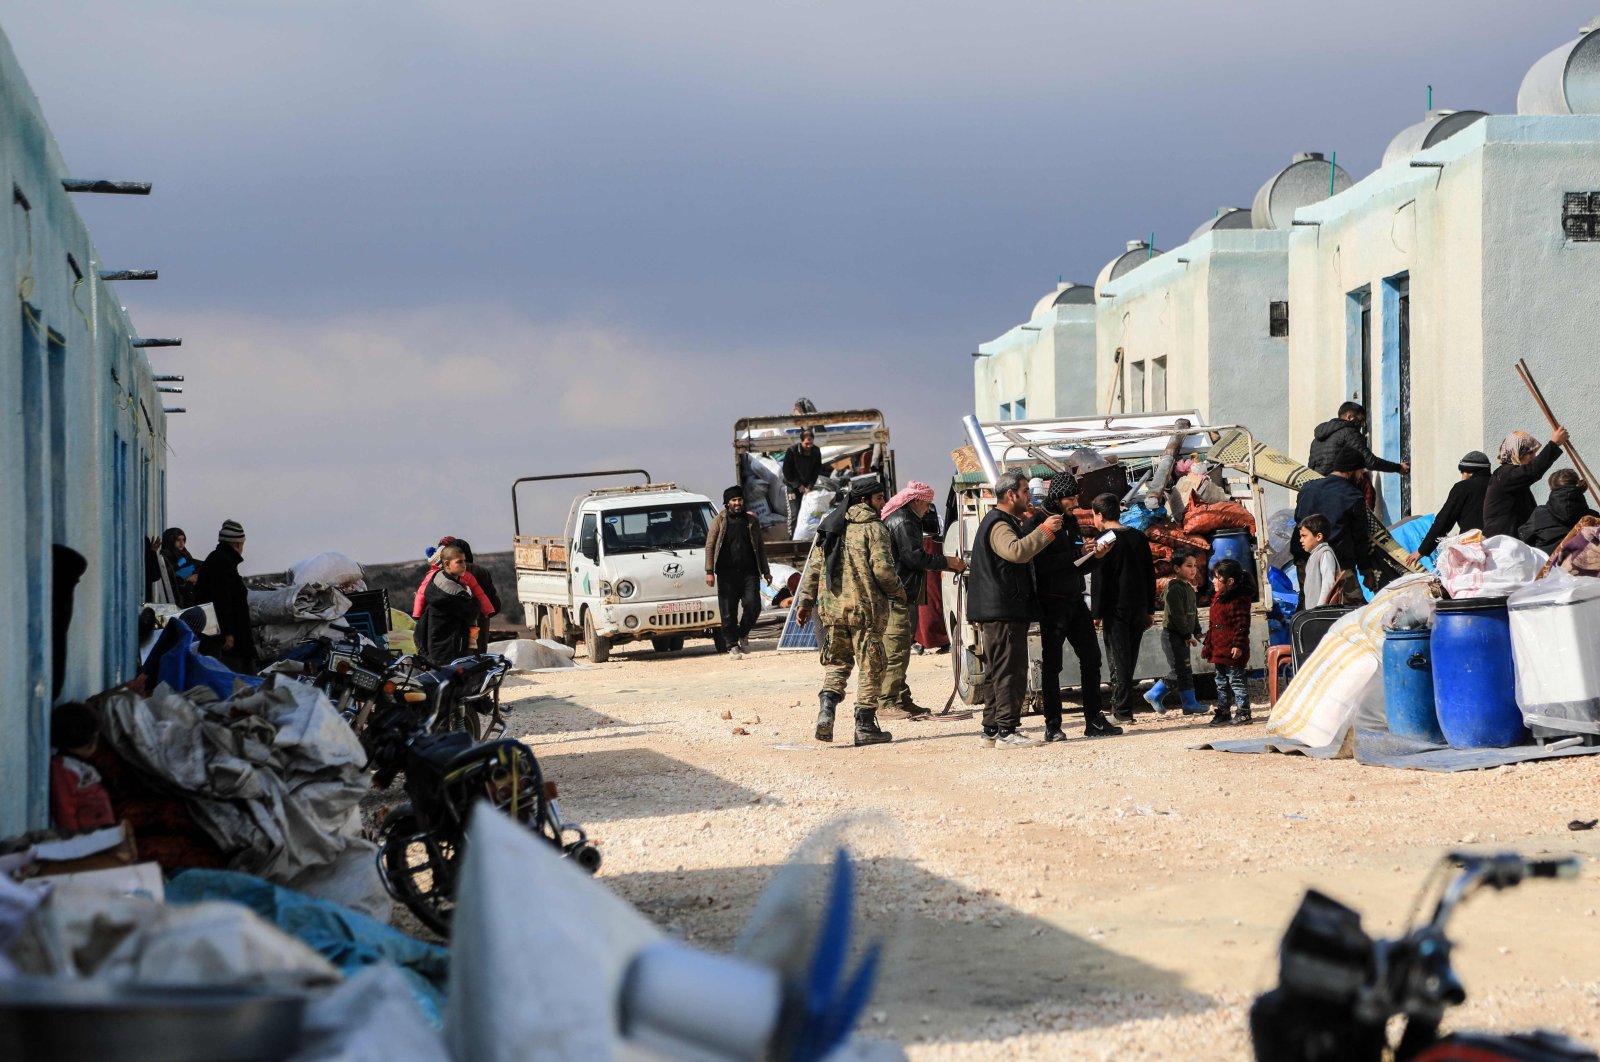 Internally displaced Syrians unload their belongings from trucks upon arrival at a new housing complex built with the support of Turkey&#039;s emergencies agency AFAD, in the opposition-held area of Bizaah, east of the city of al-Bab in the northern Aleppo governorate, Syria, on Feb. 9, 2022 (AFP Photo)